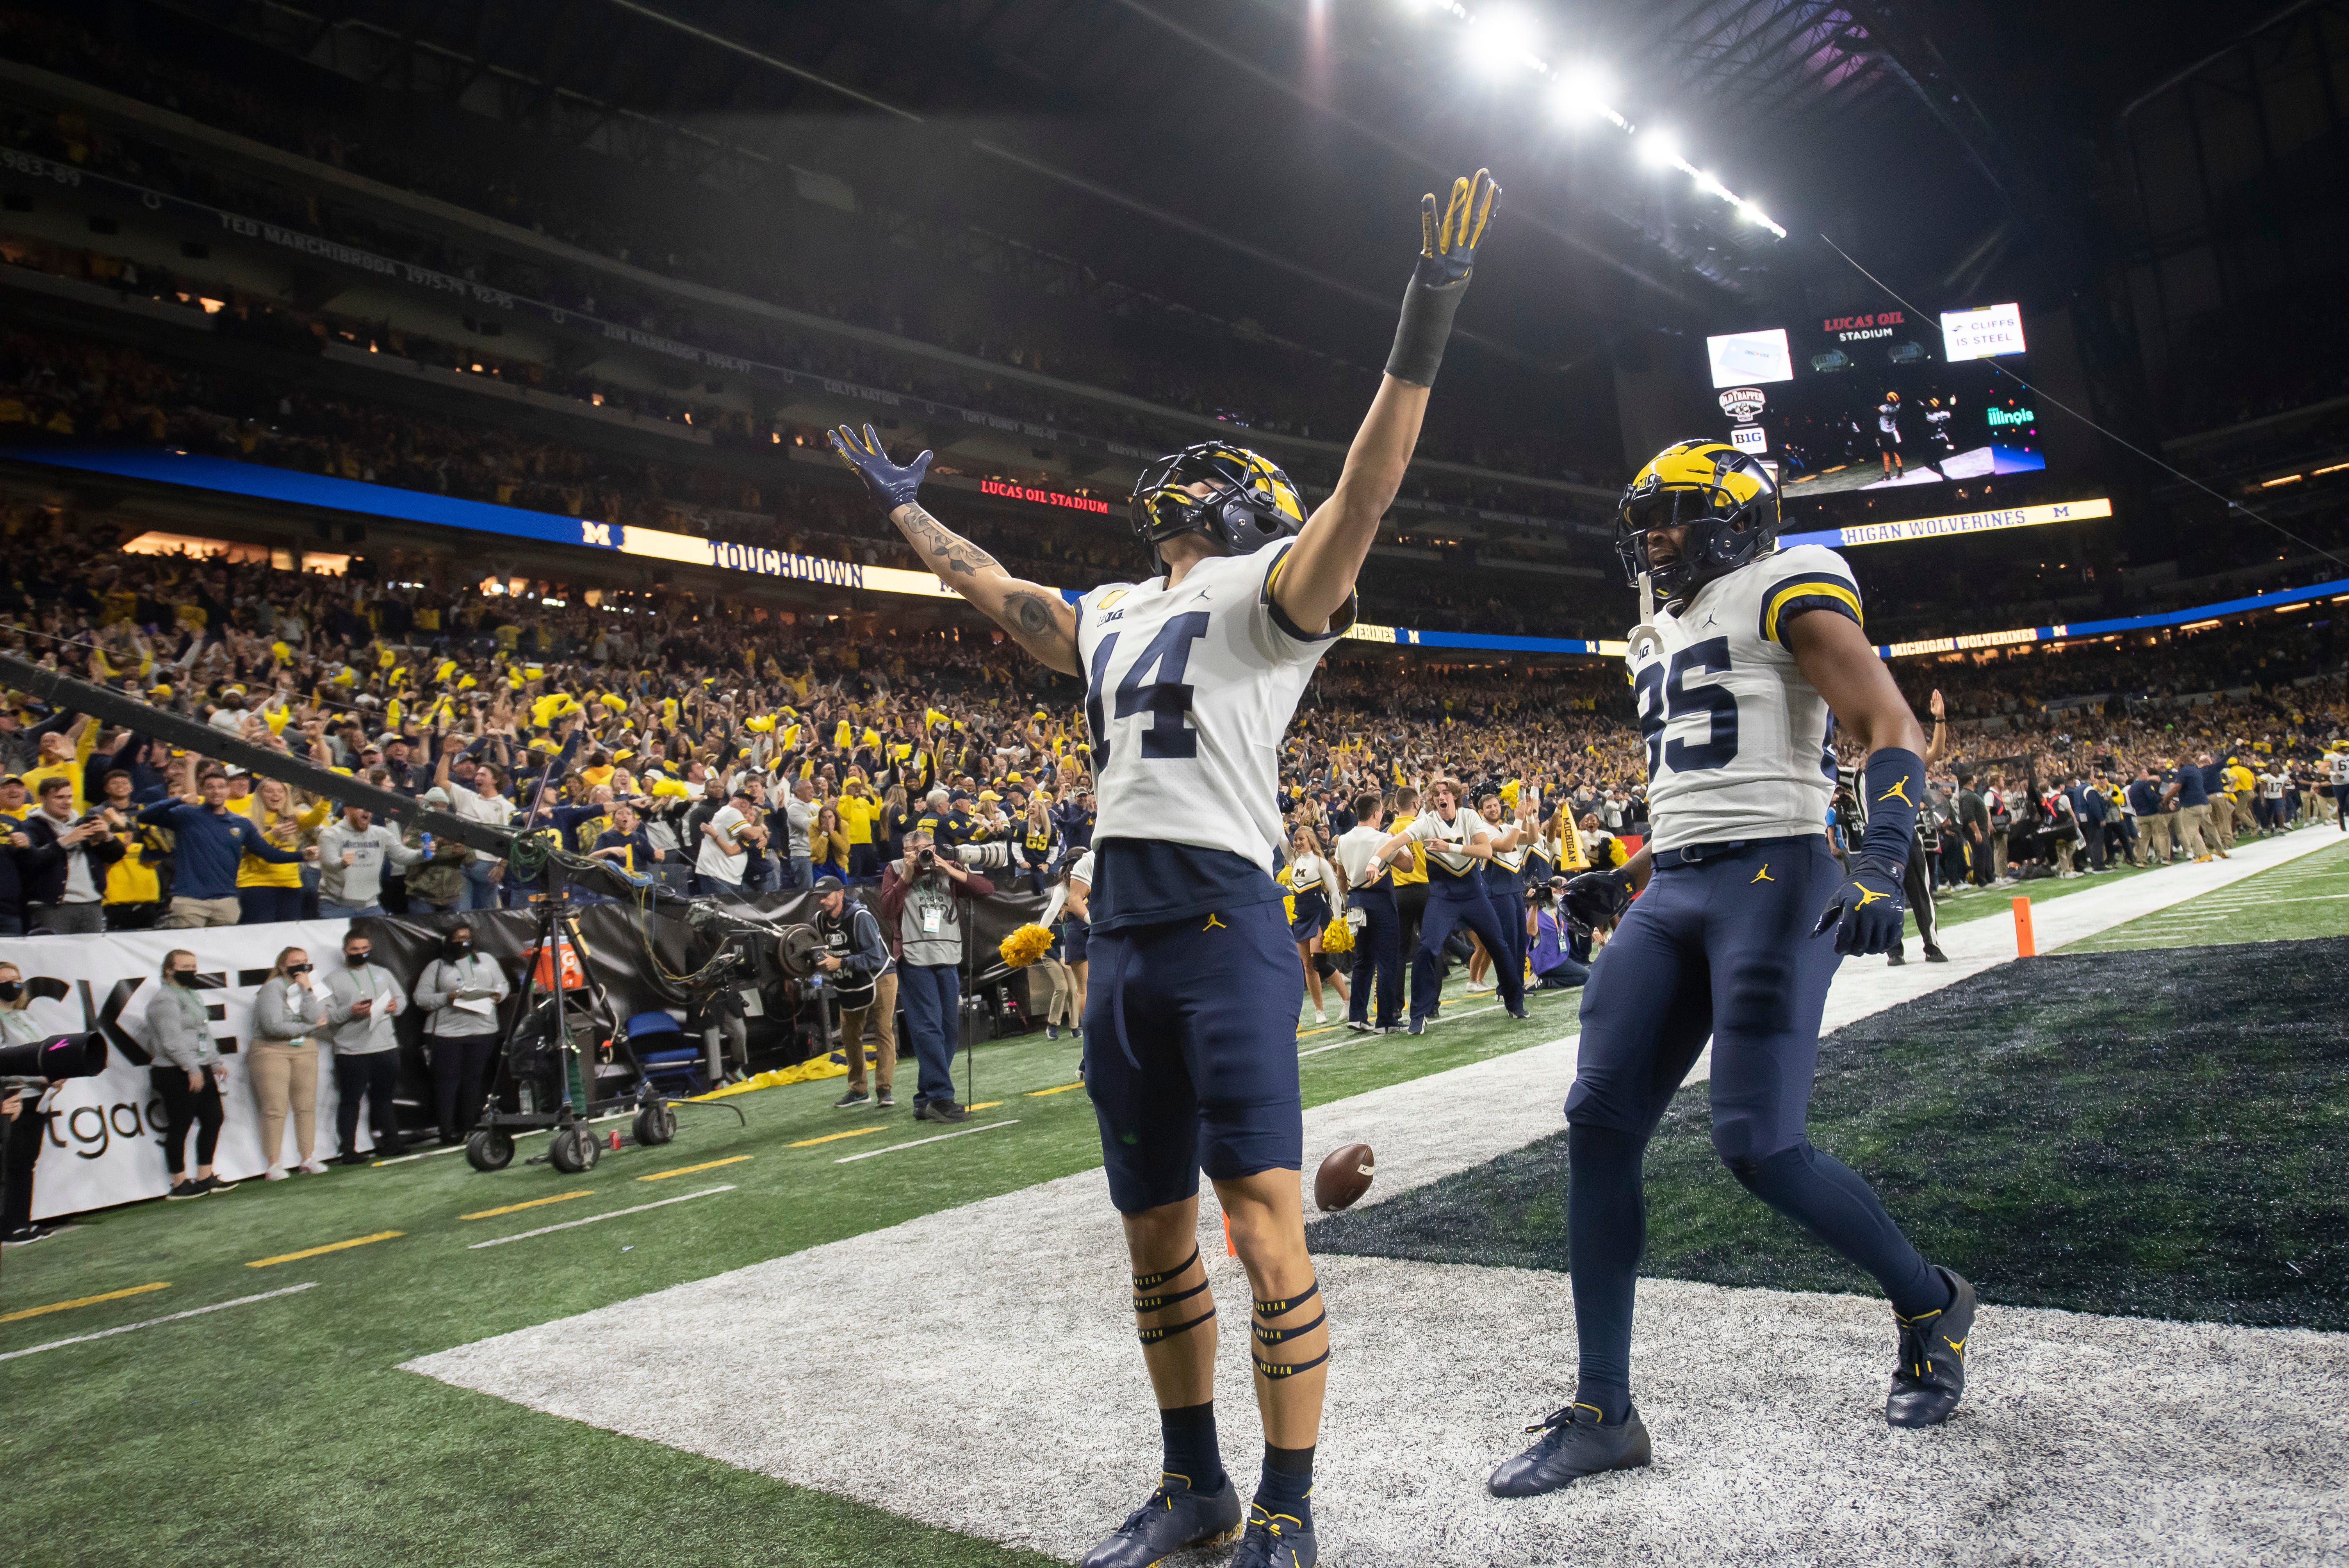 Michigan wide receiver Roman Wilson celebrates after scoring a touchdown during the first quarter.